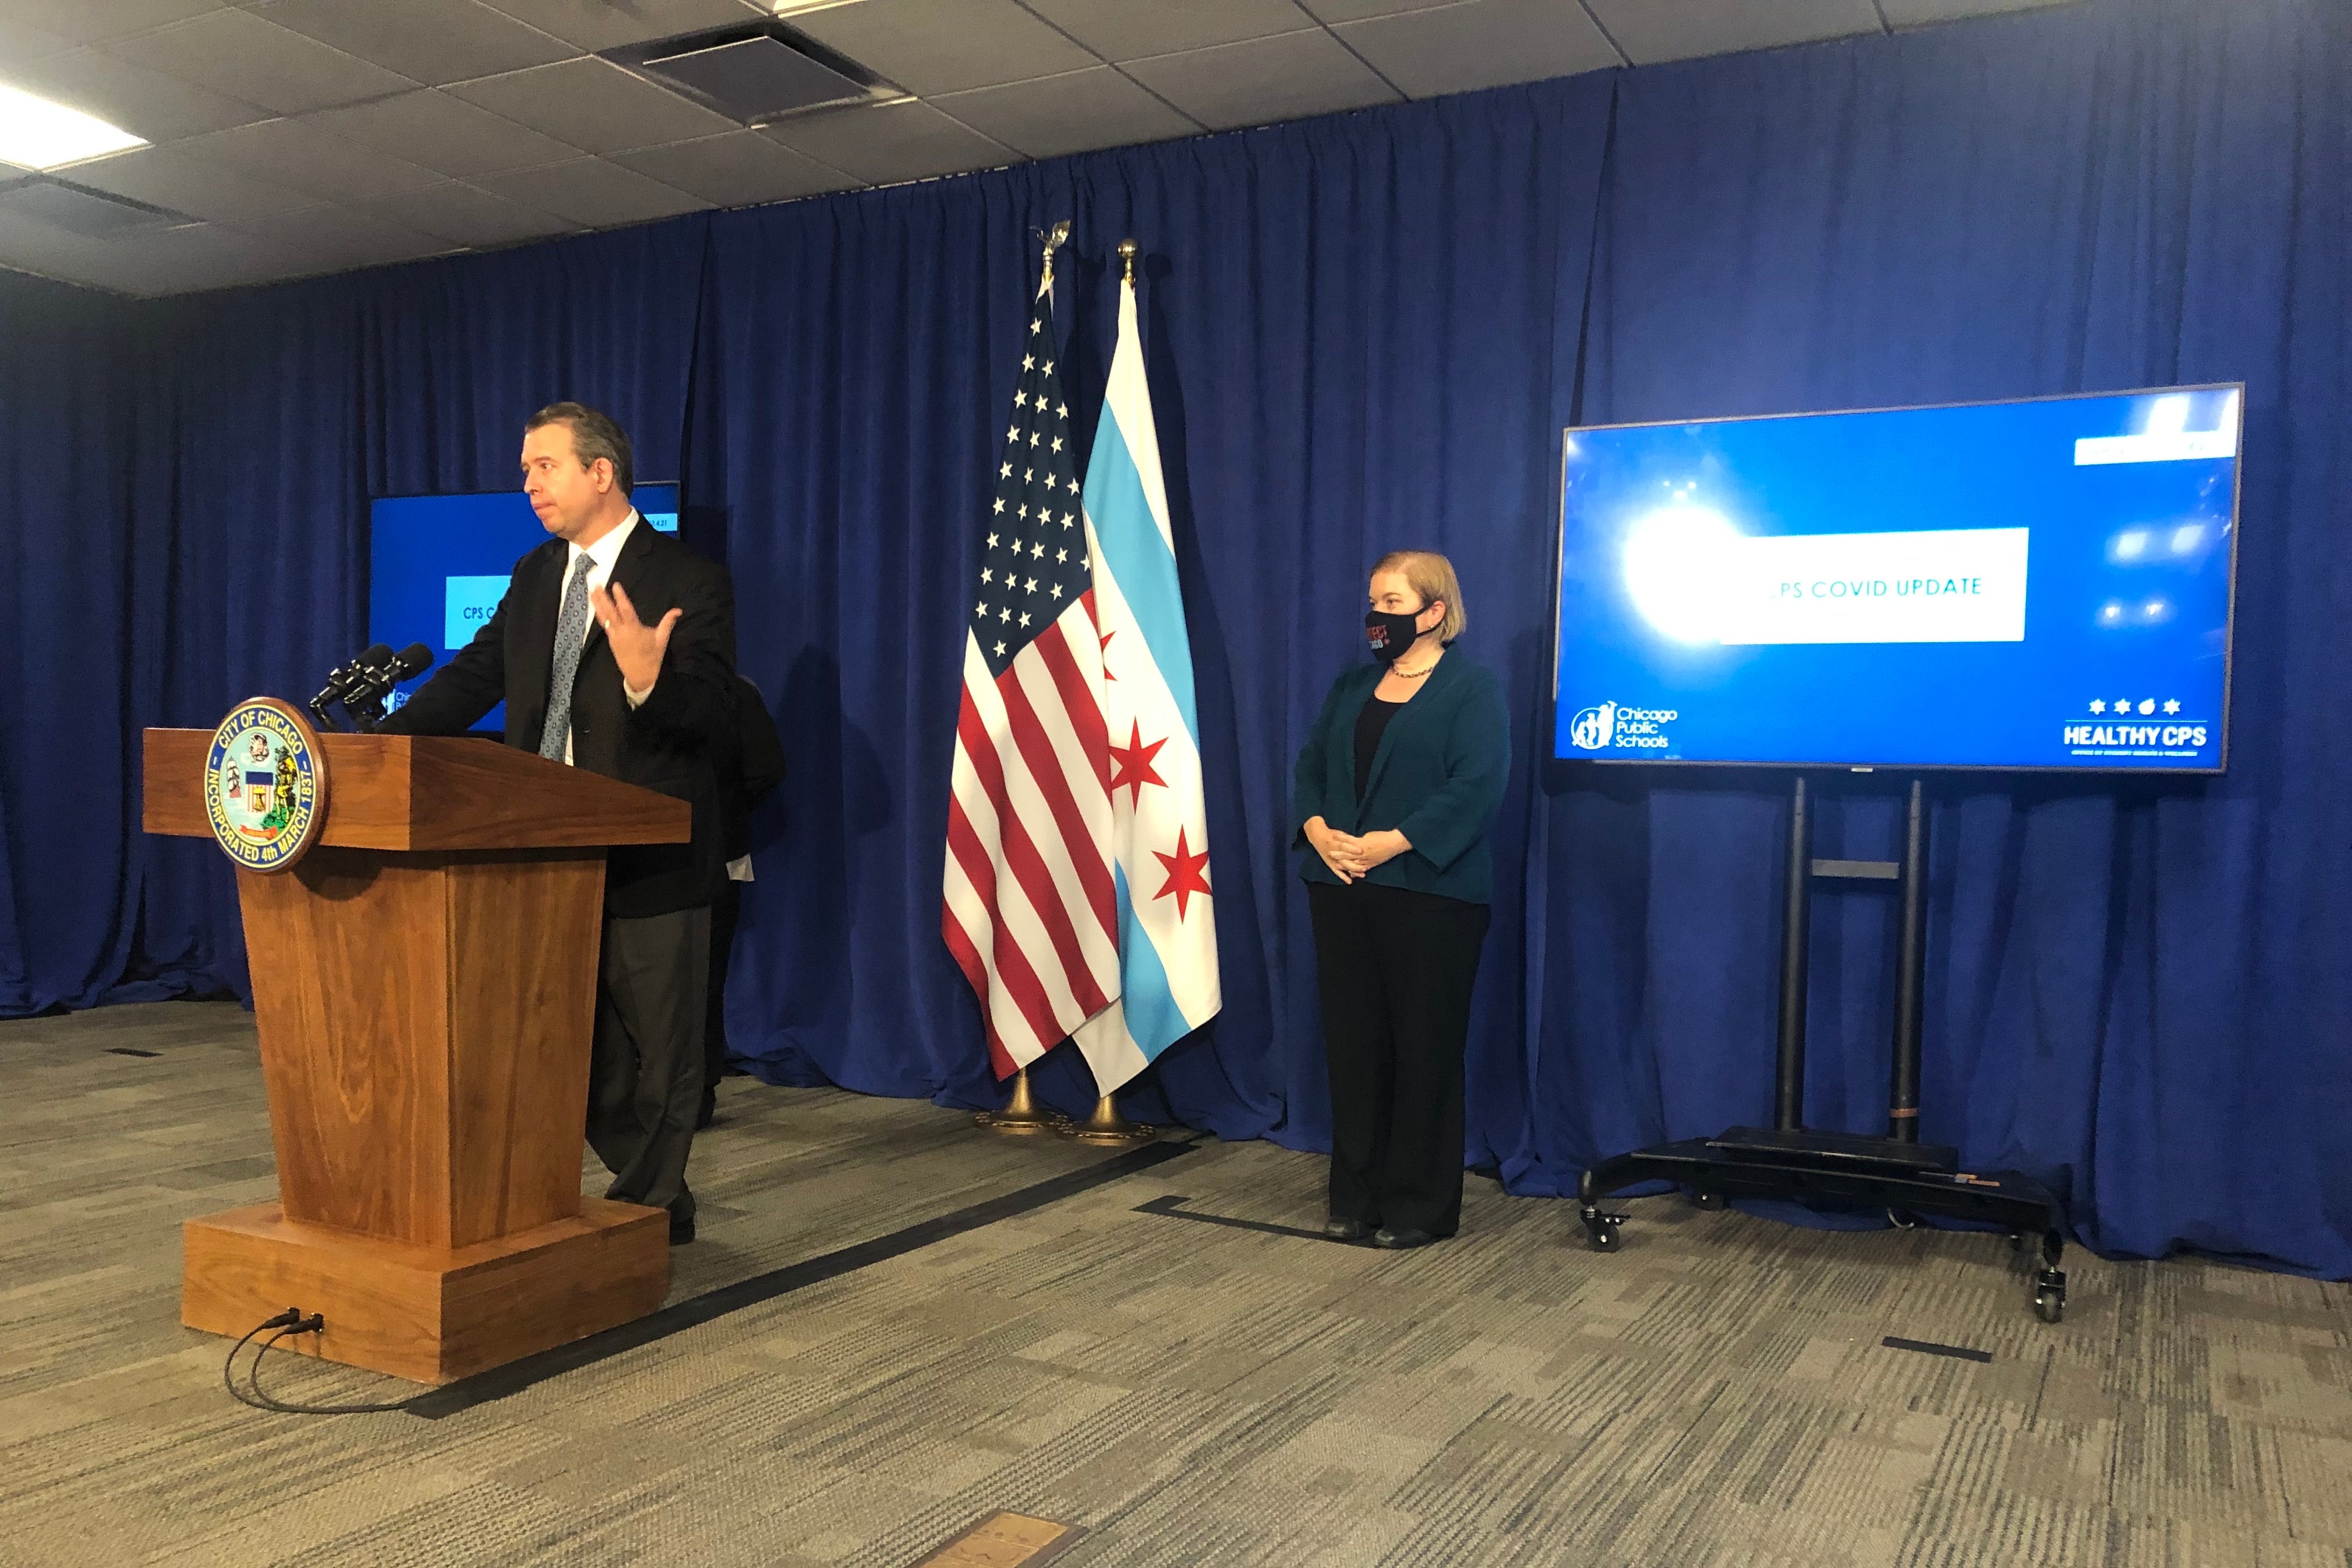 Standing at a podium in a suit and tie, Chicago Public Schools CEO Pedro Martinez explains the new quarantine rules alongside Dr. Allison Arwady, the city’s top health official.